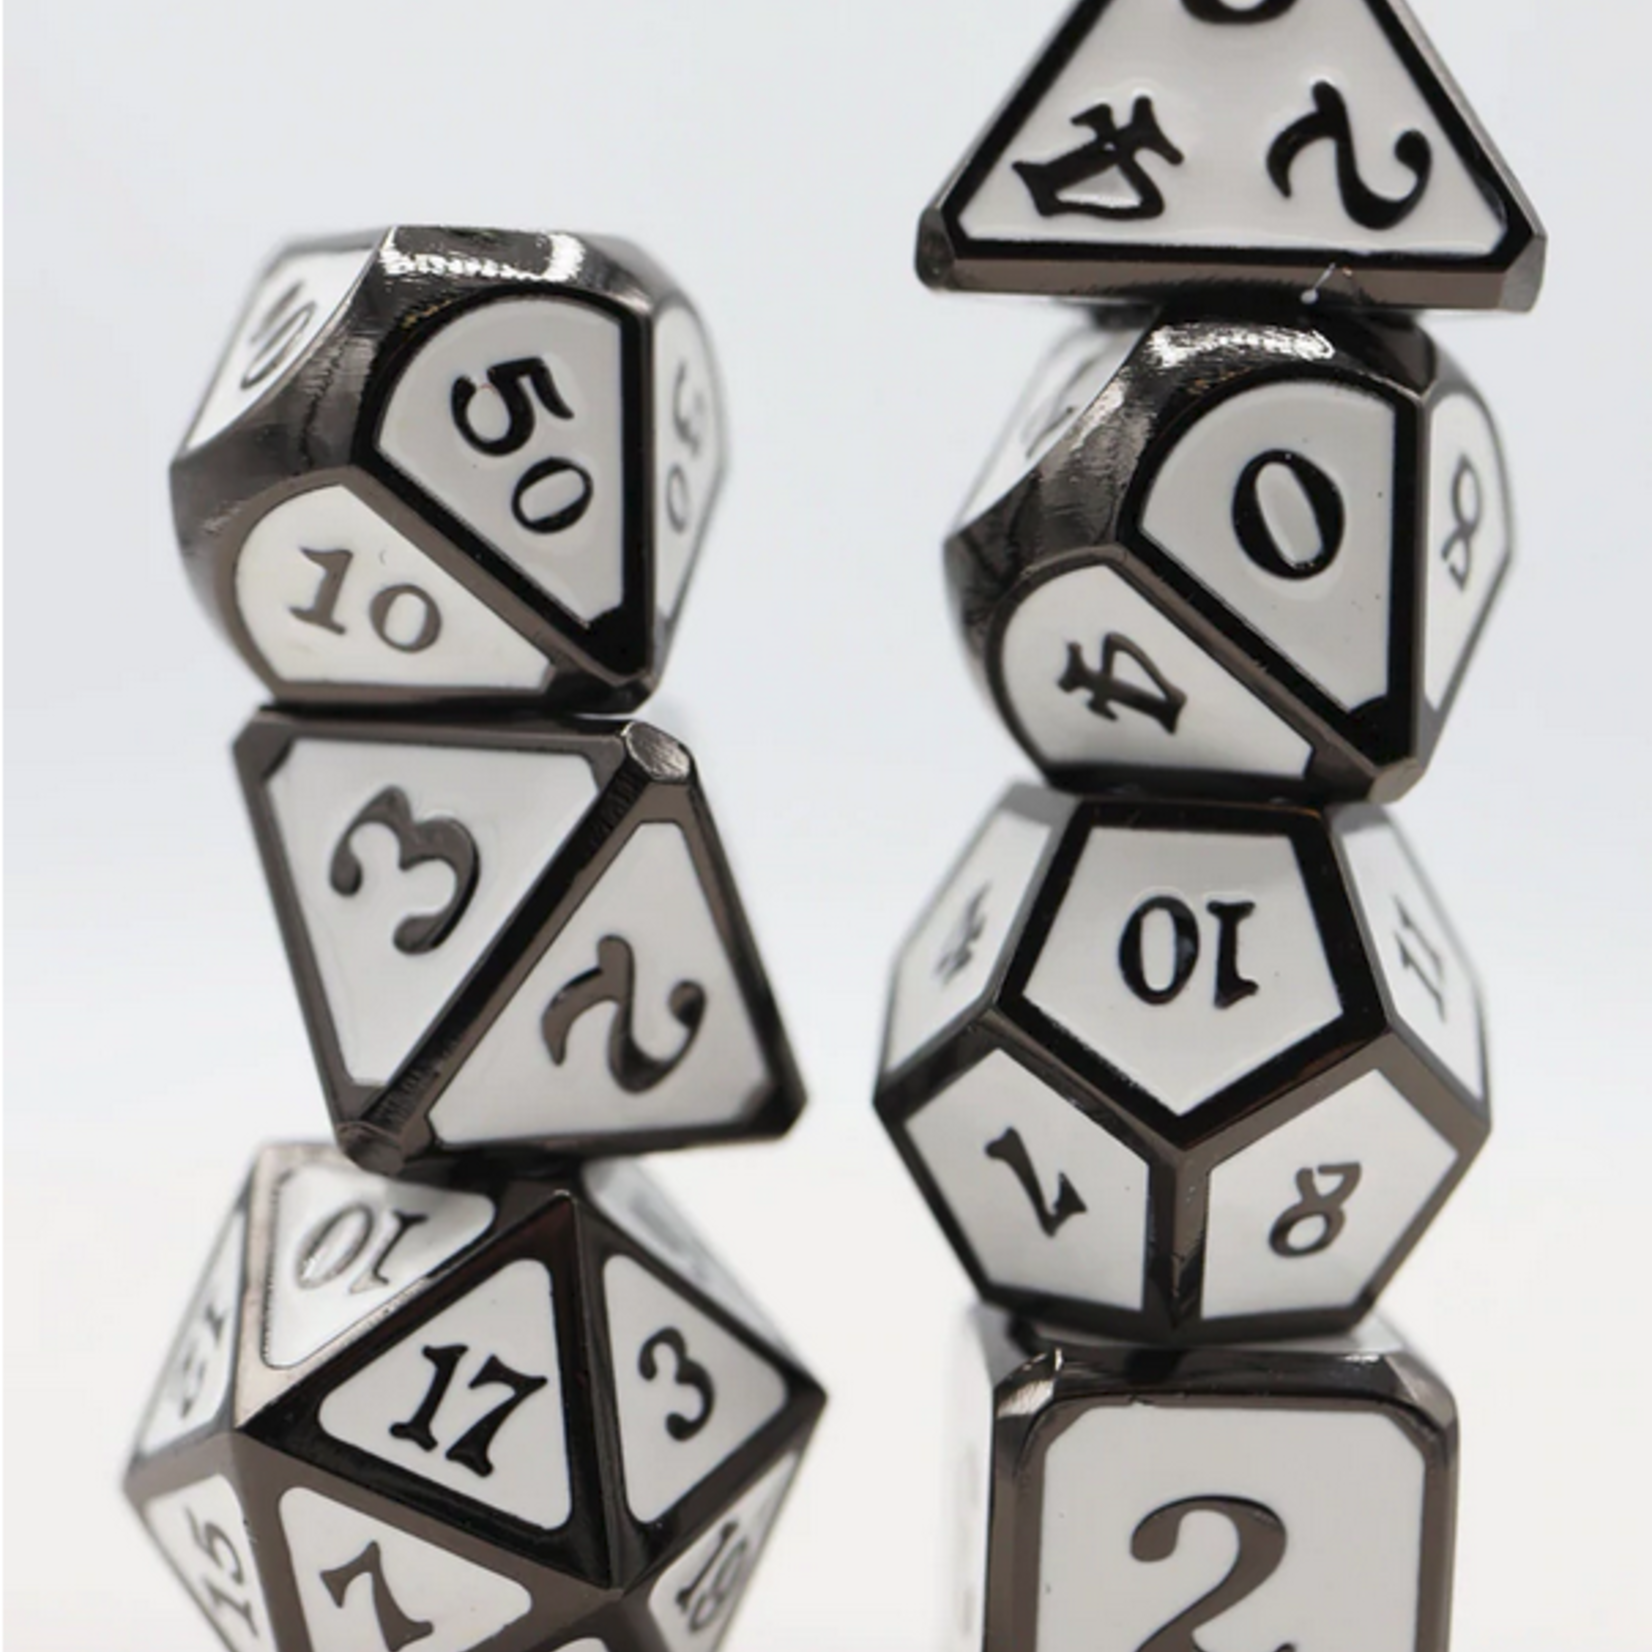 Foam Brain Games FB Snow and Ashes RPG Dice Set